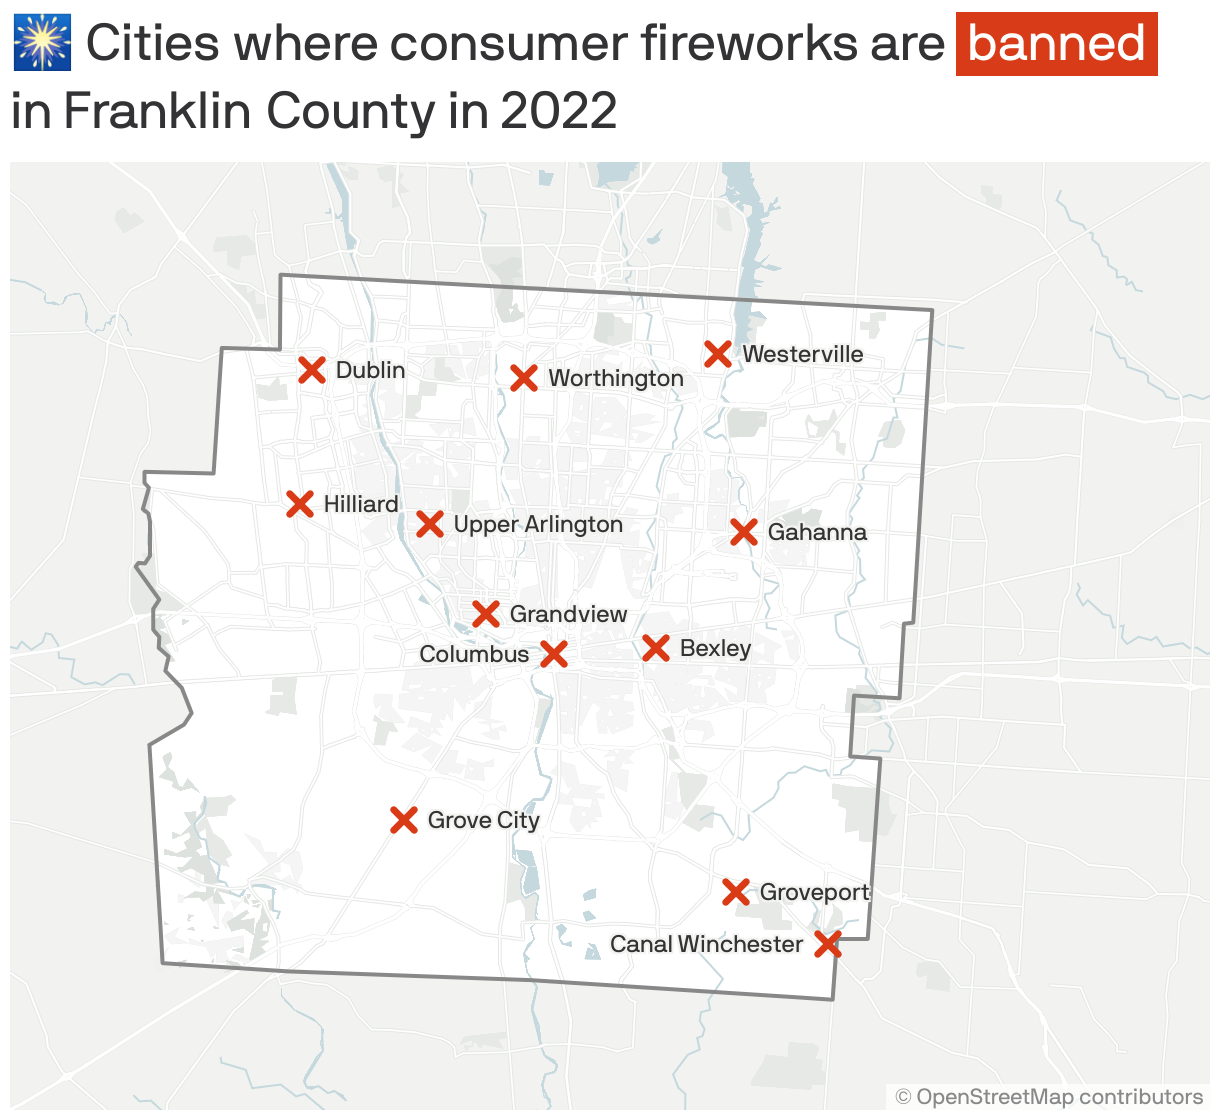 🎆 Cities where consumer fireworks are <span style="background:#D83B18; padding:3px 5px;color:white;">banned</span> in Franklin&nbsp;County in 2022